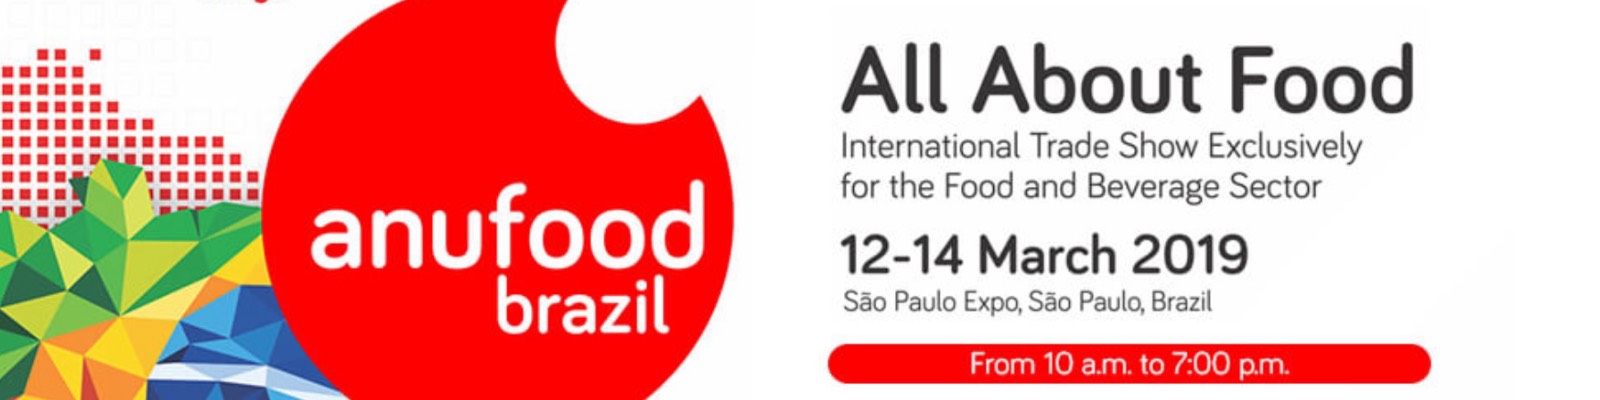 ANUFOOD BRAZIL 2019 – all about food